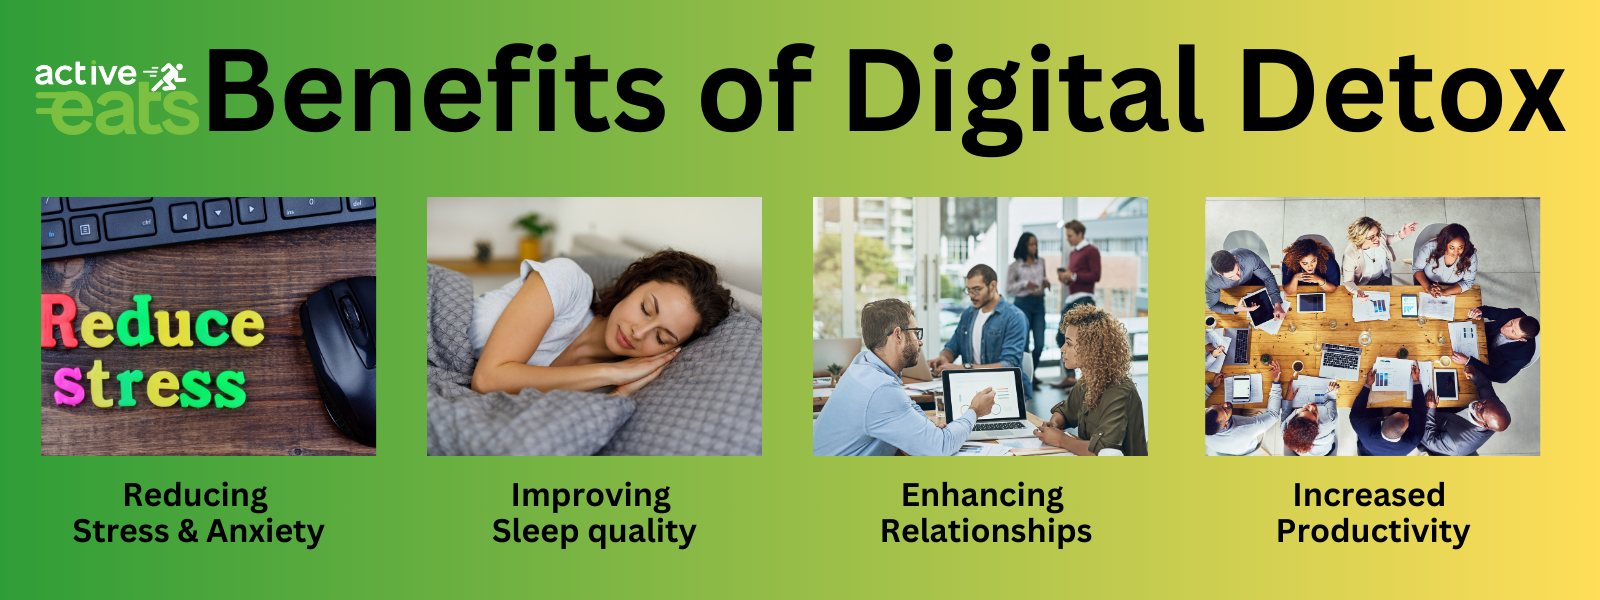 Image: A visual representation of the top 4 benefits of a digital detox. The graphic includes concise text and corresponding icons, showcasing the advantages, which include reduced stress, improved sleep, enhanced productivity, and increased real-life connections. This visual aids in quickly understanding the positive outcomes of disconnecting from digital devices.